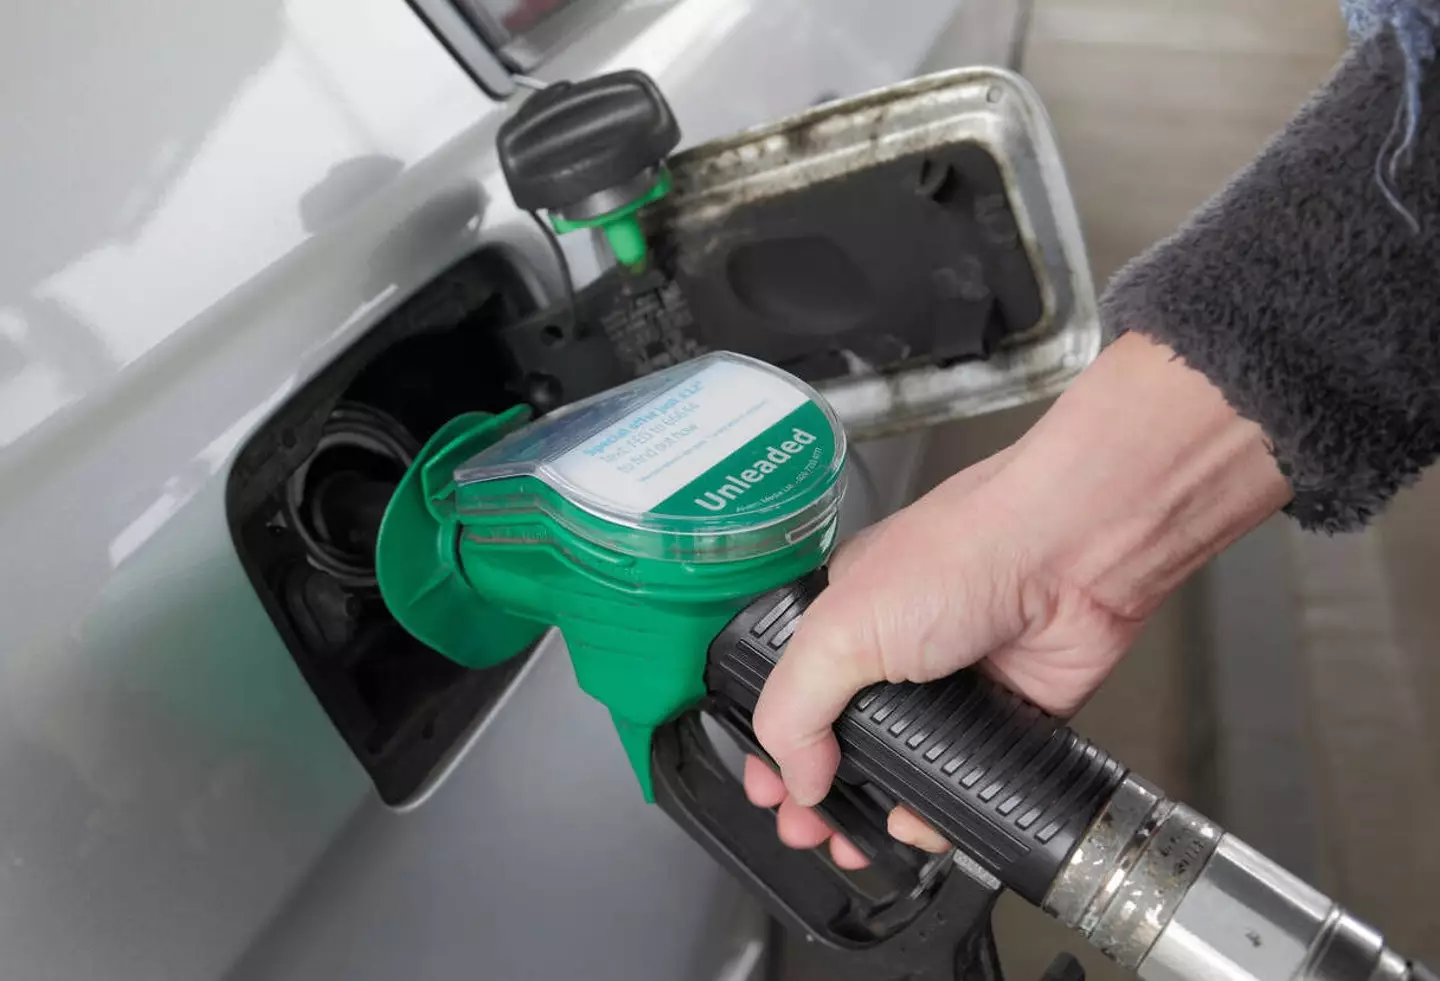 Many have seen fuel prices rise in recent weeks.